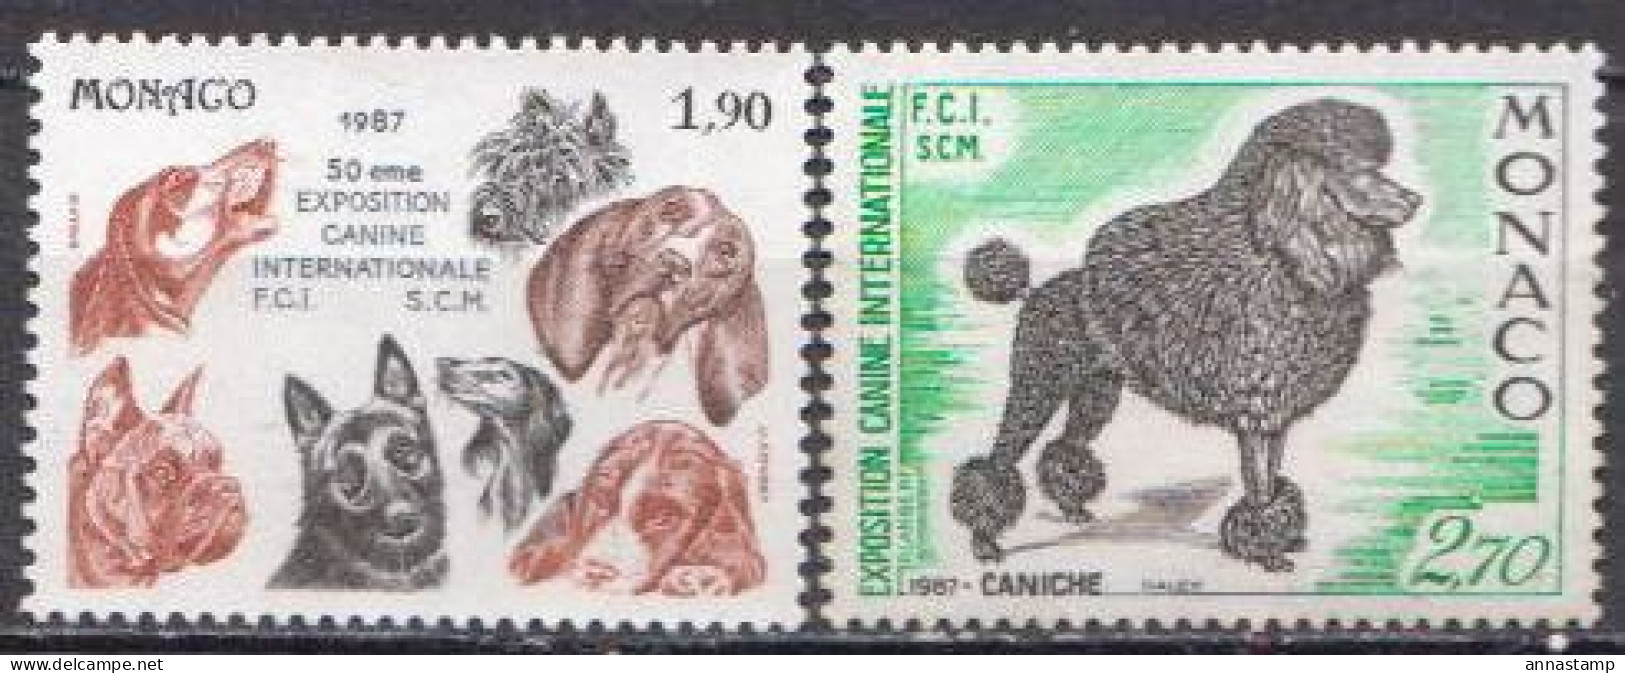 Monaco MNH Stamps - Dogs